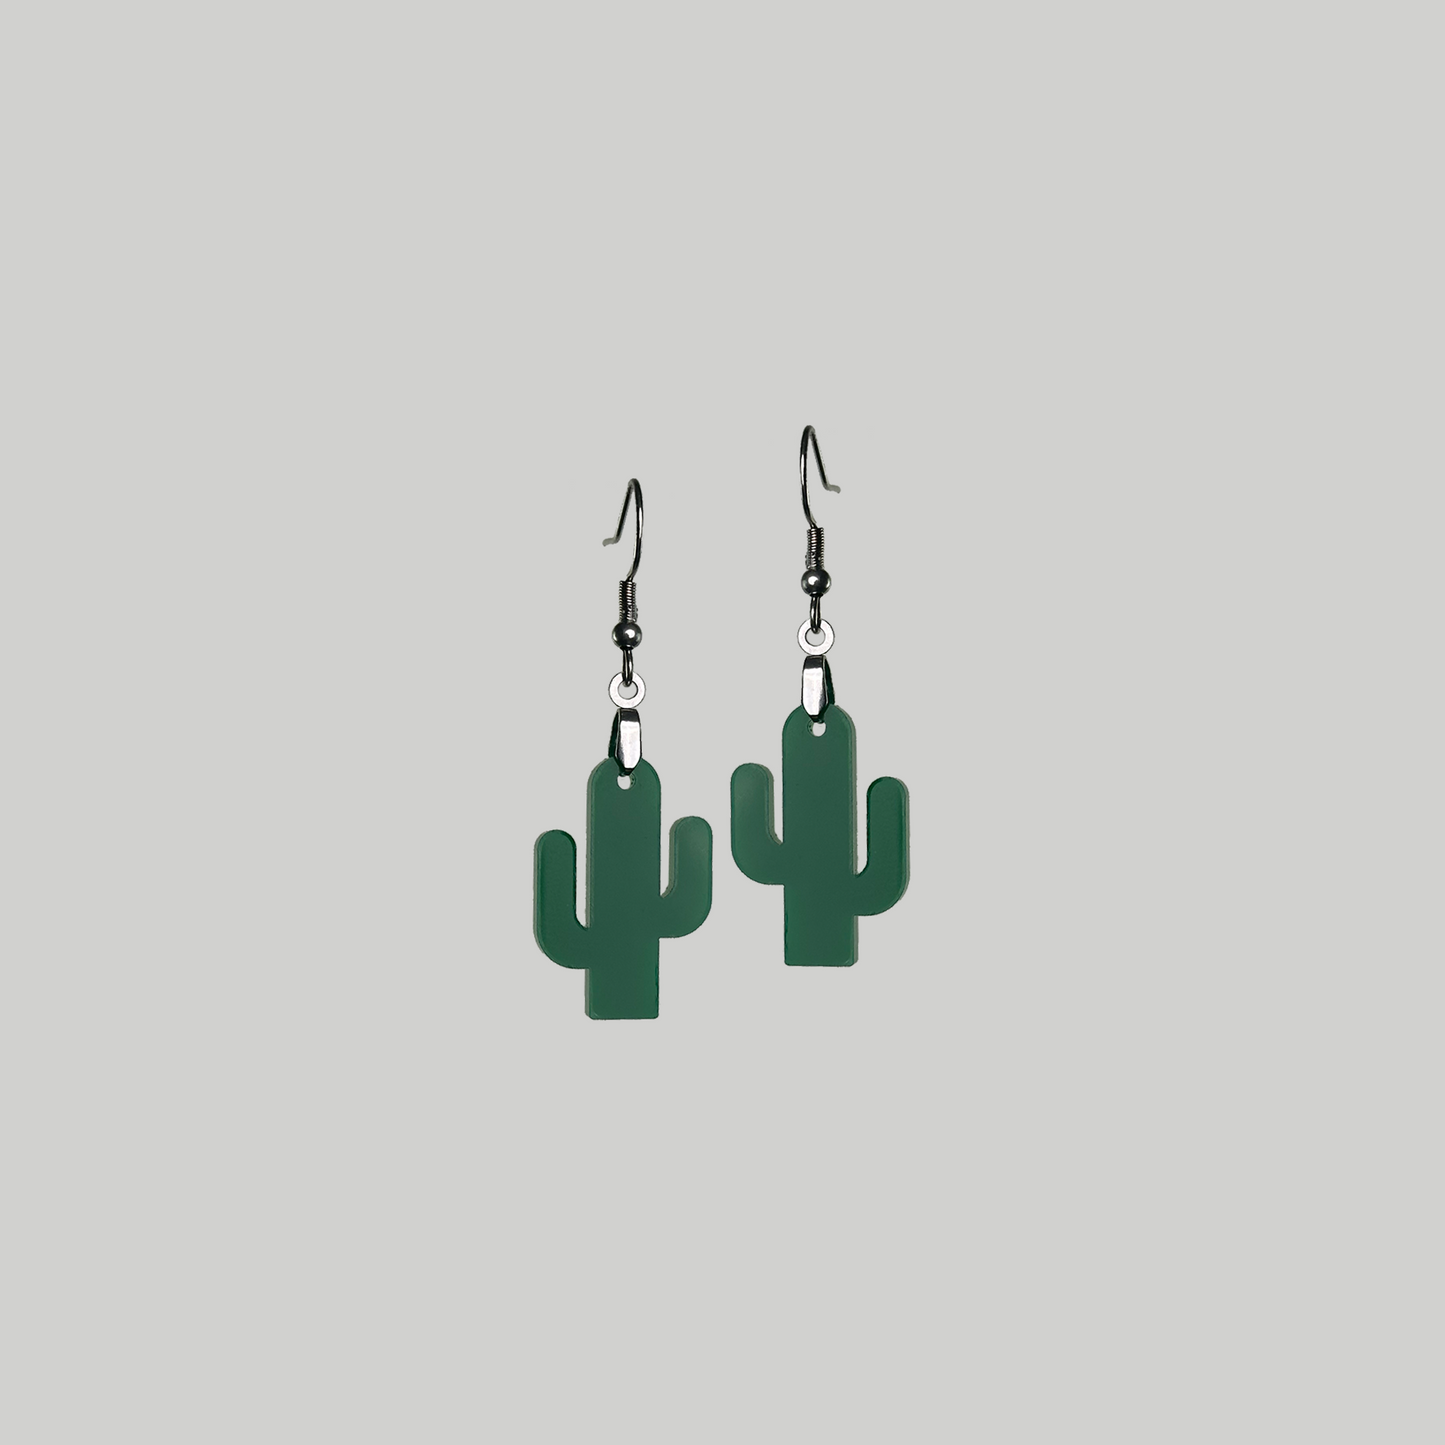 Green Cactus Style Earrings: Fashion-forward accessories featuring adorable cactus motifs for a playful and on-trend look.